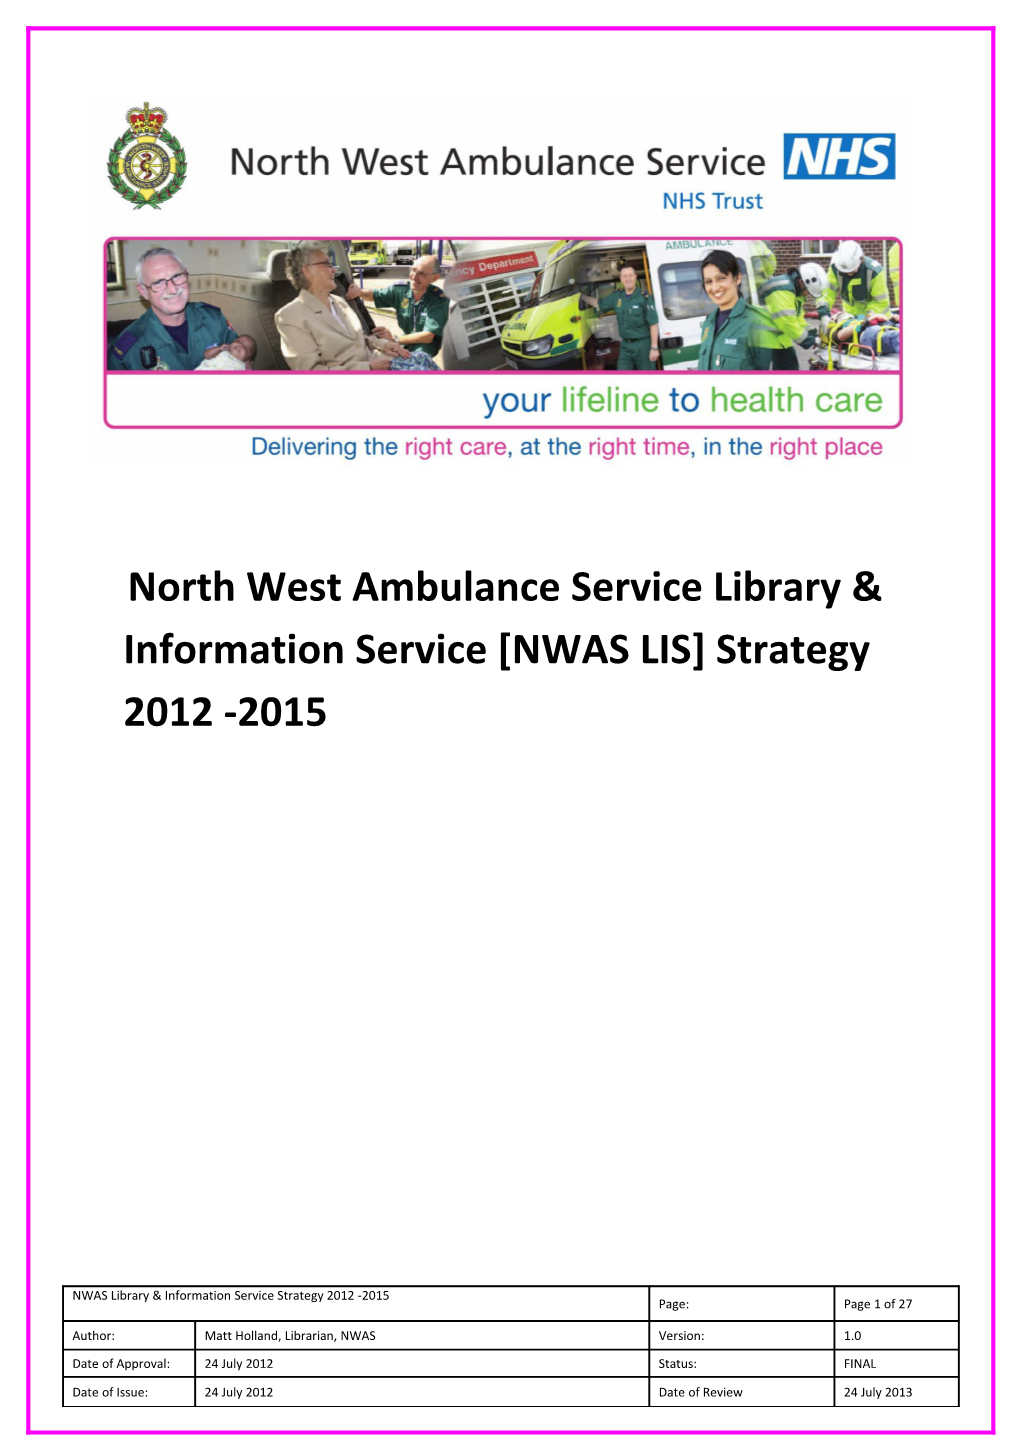 North West Ambulance Service Library & Information Service NWAS LIS Strategy 2012 -2015